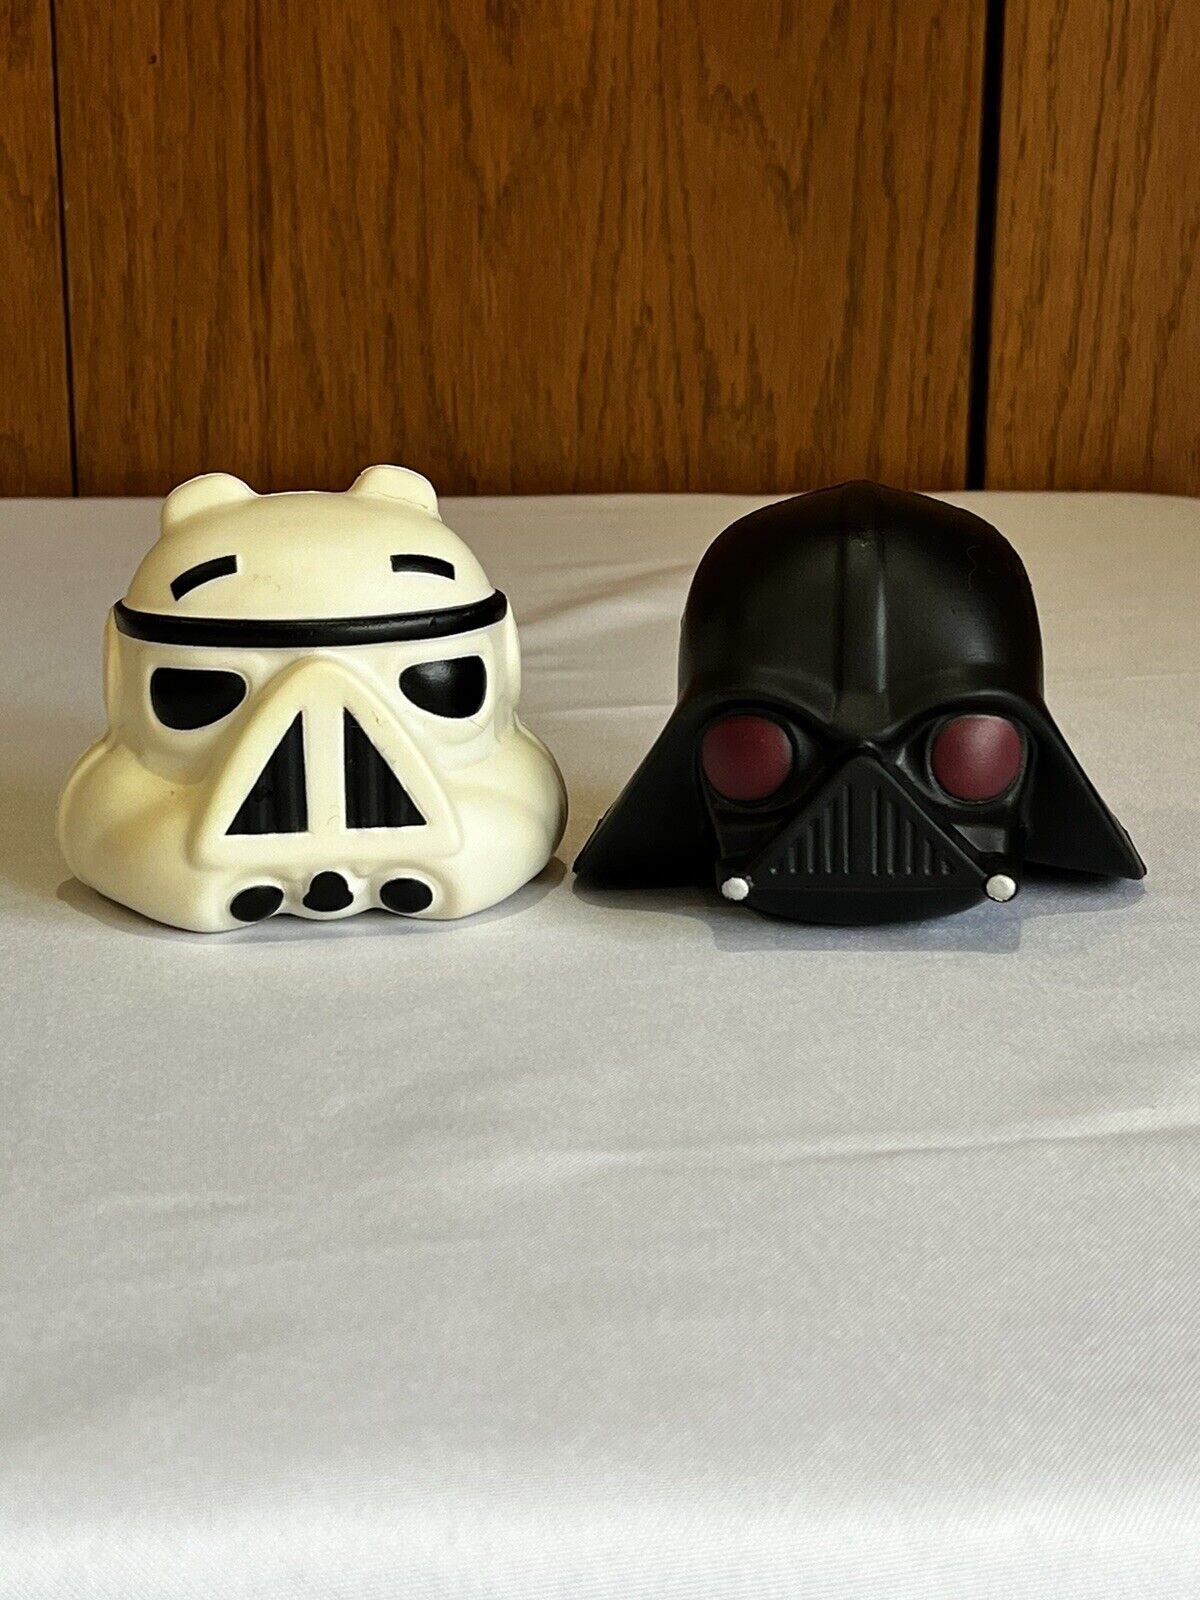 Hasbro ANGRY BIRDS STAR WARS FOAM FLYERS Storm Trooper Pig And Darth Vader 2012